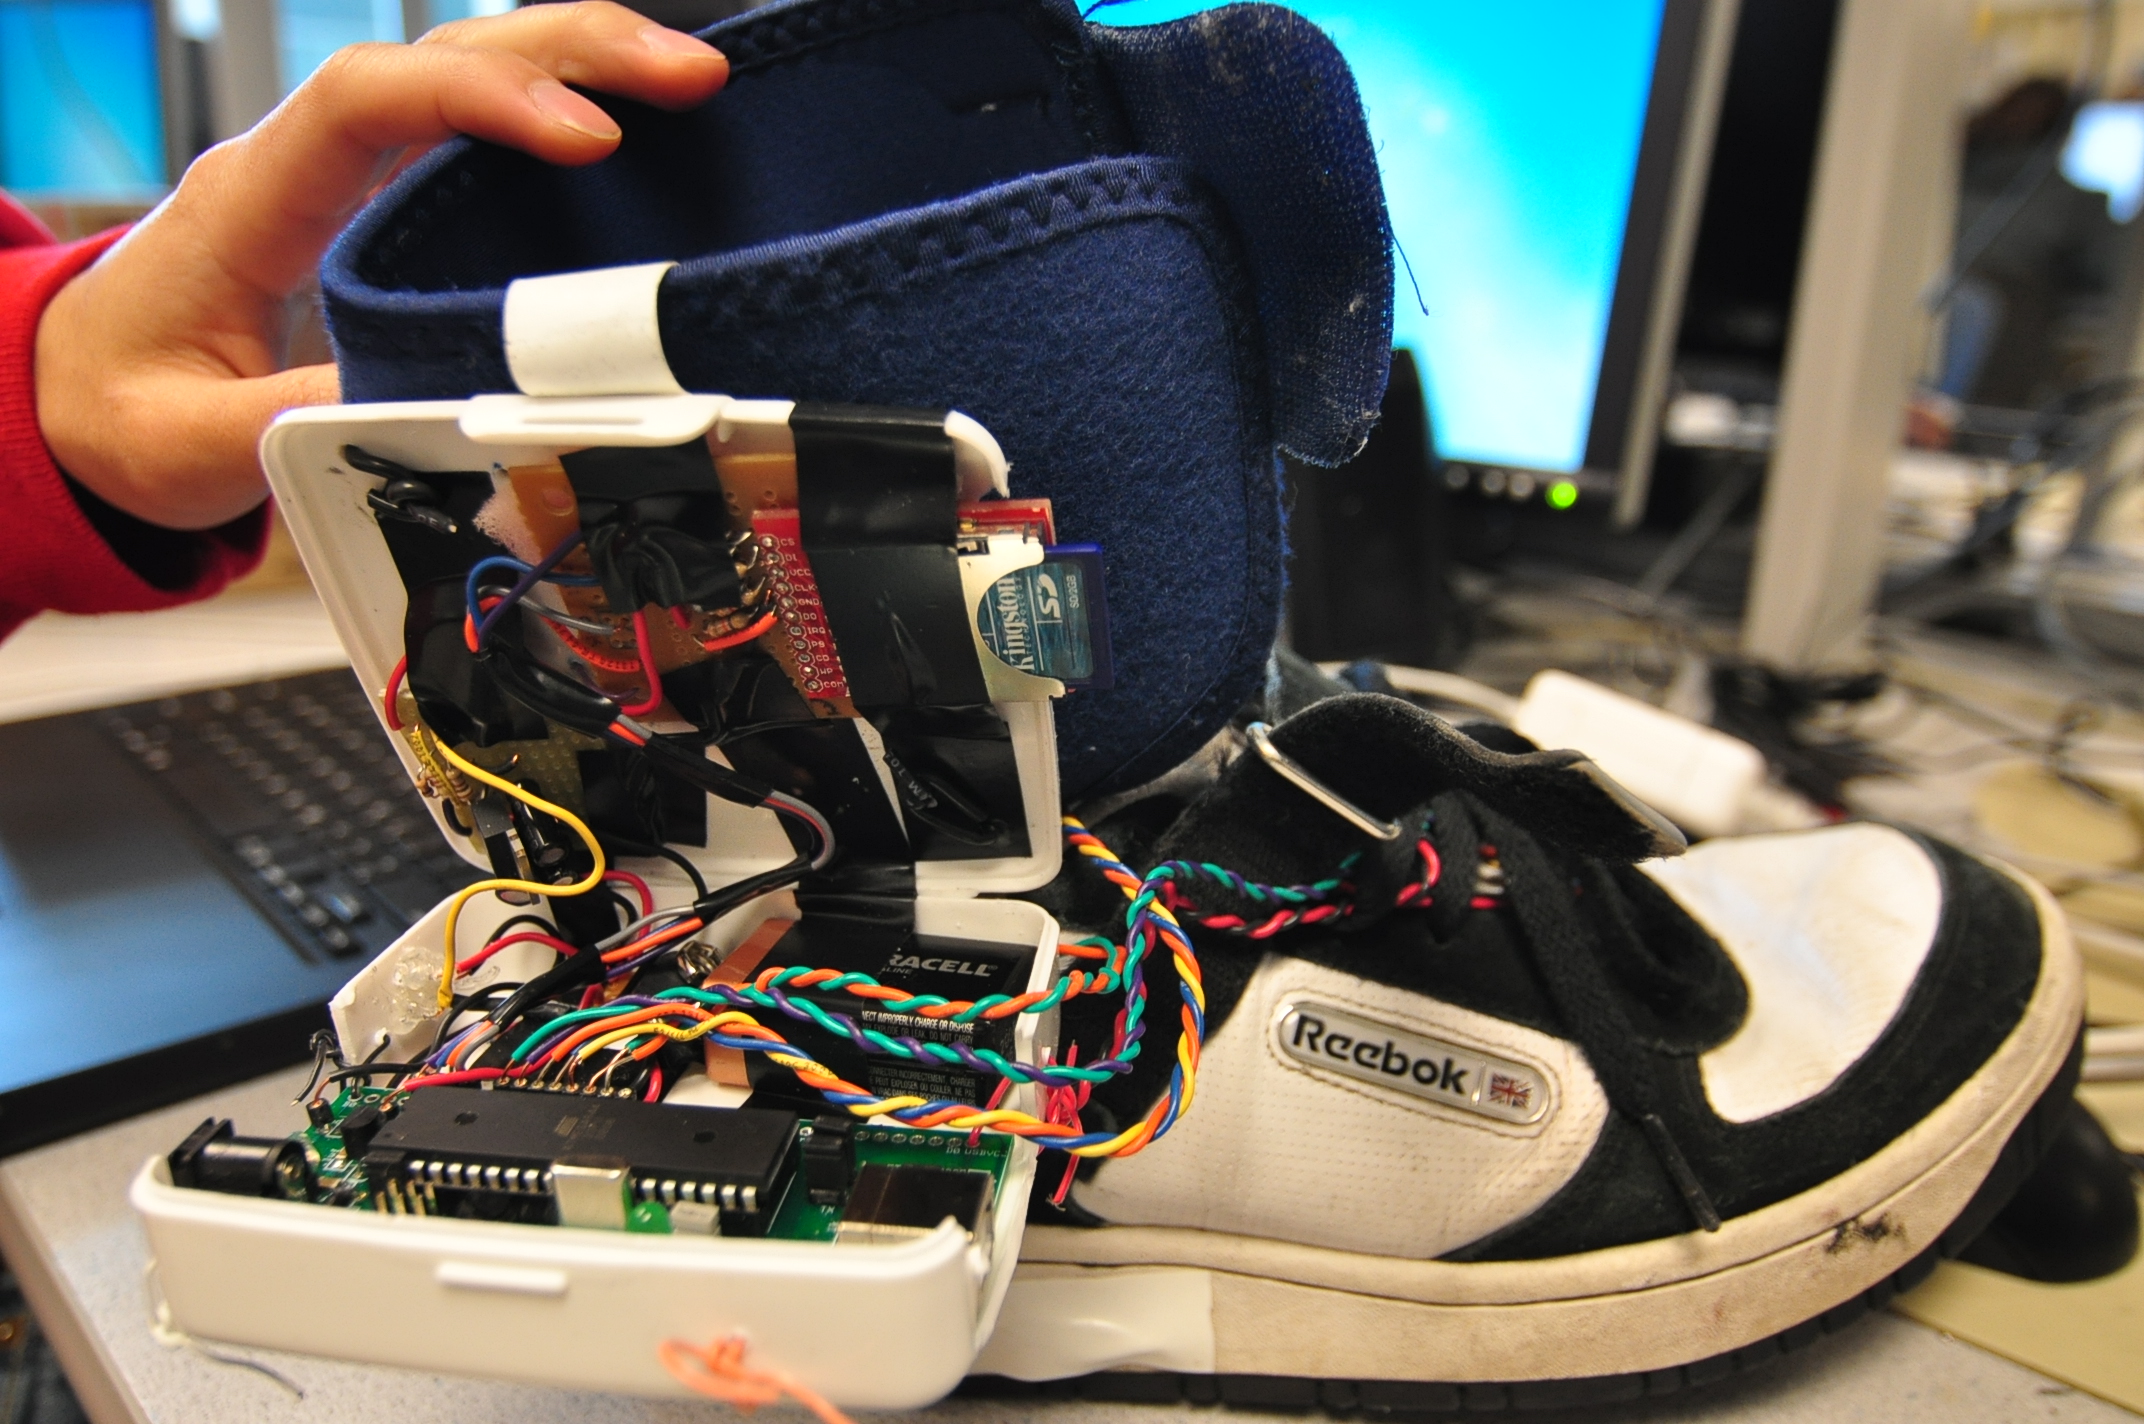 Hardware Integrated into Shoe